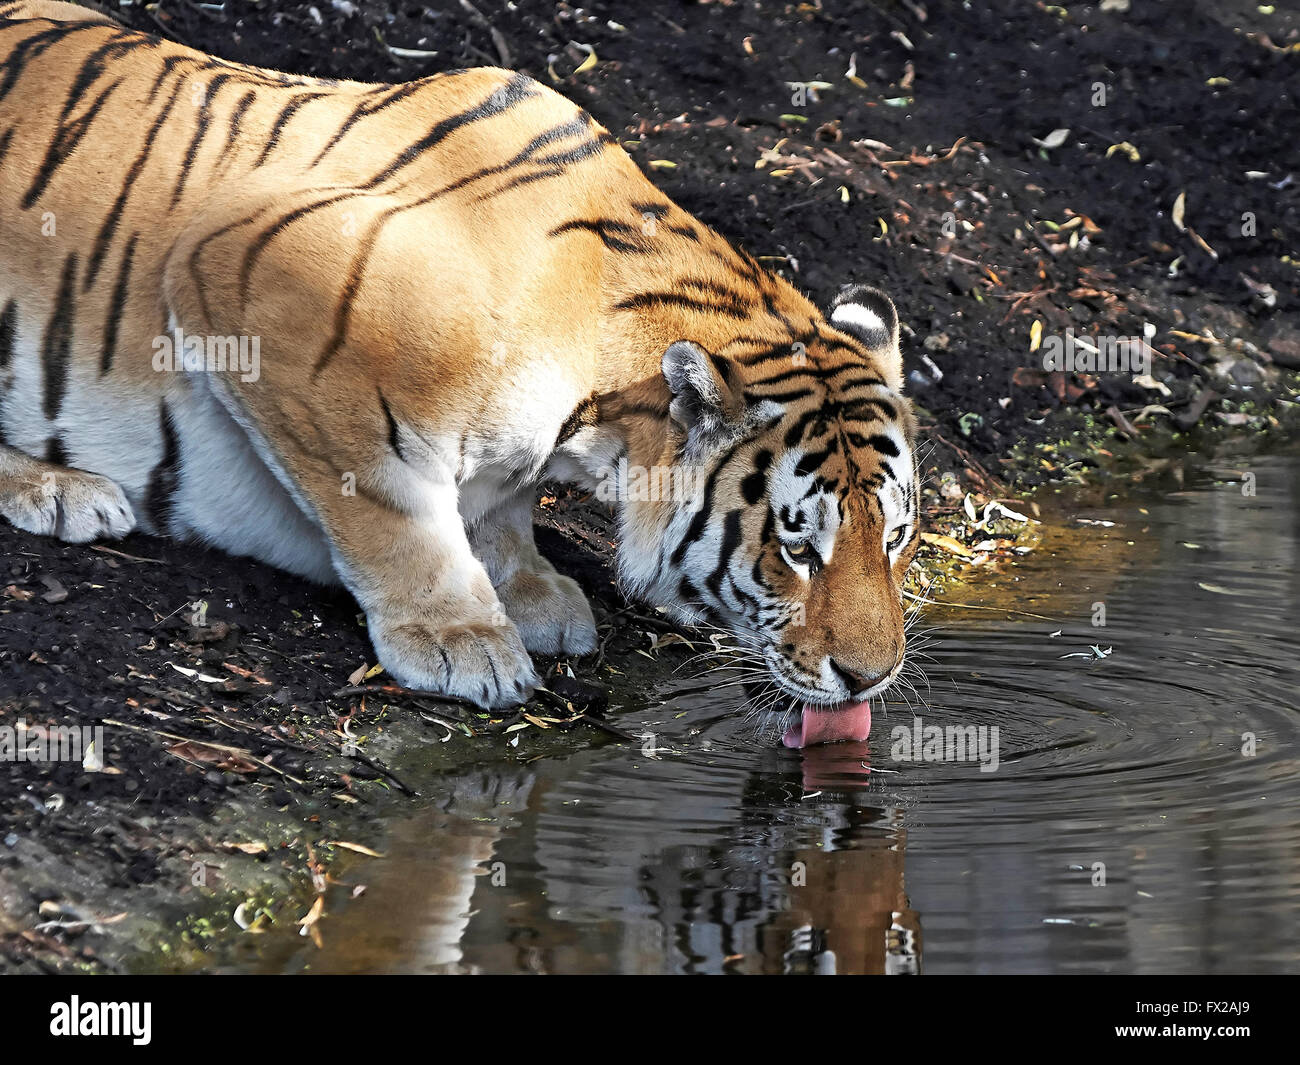 Amur Tiger drinking water from the lake in its habitat Stock Photo